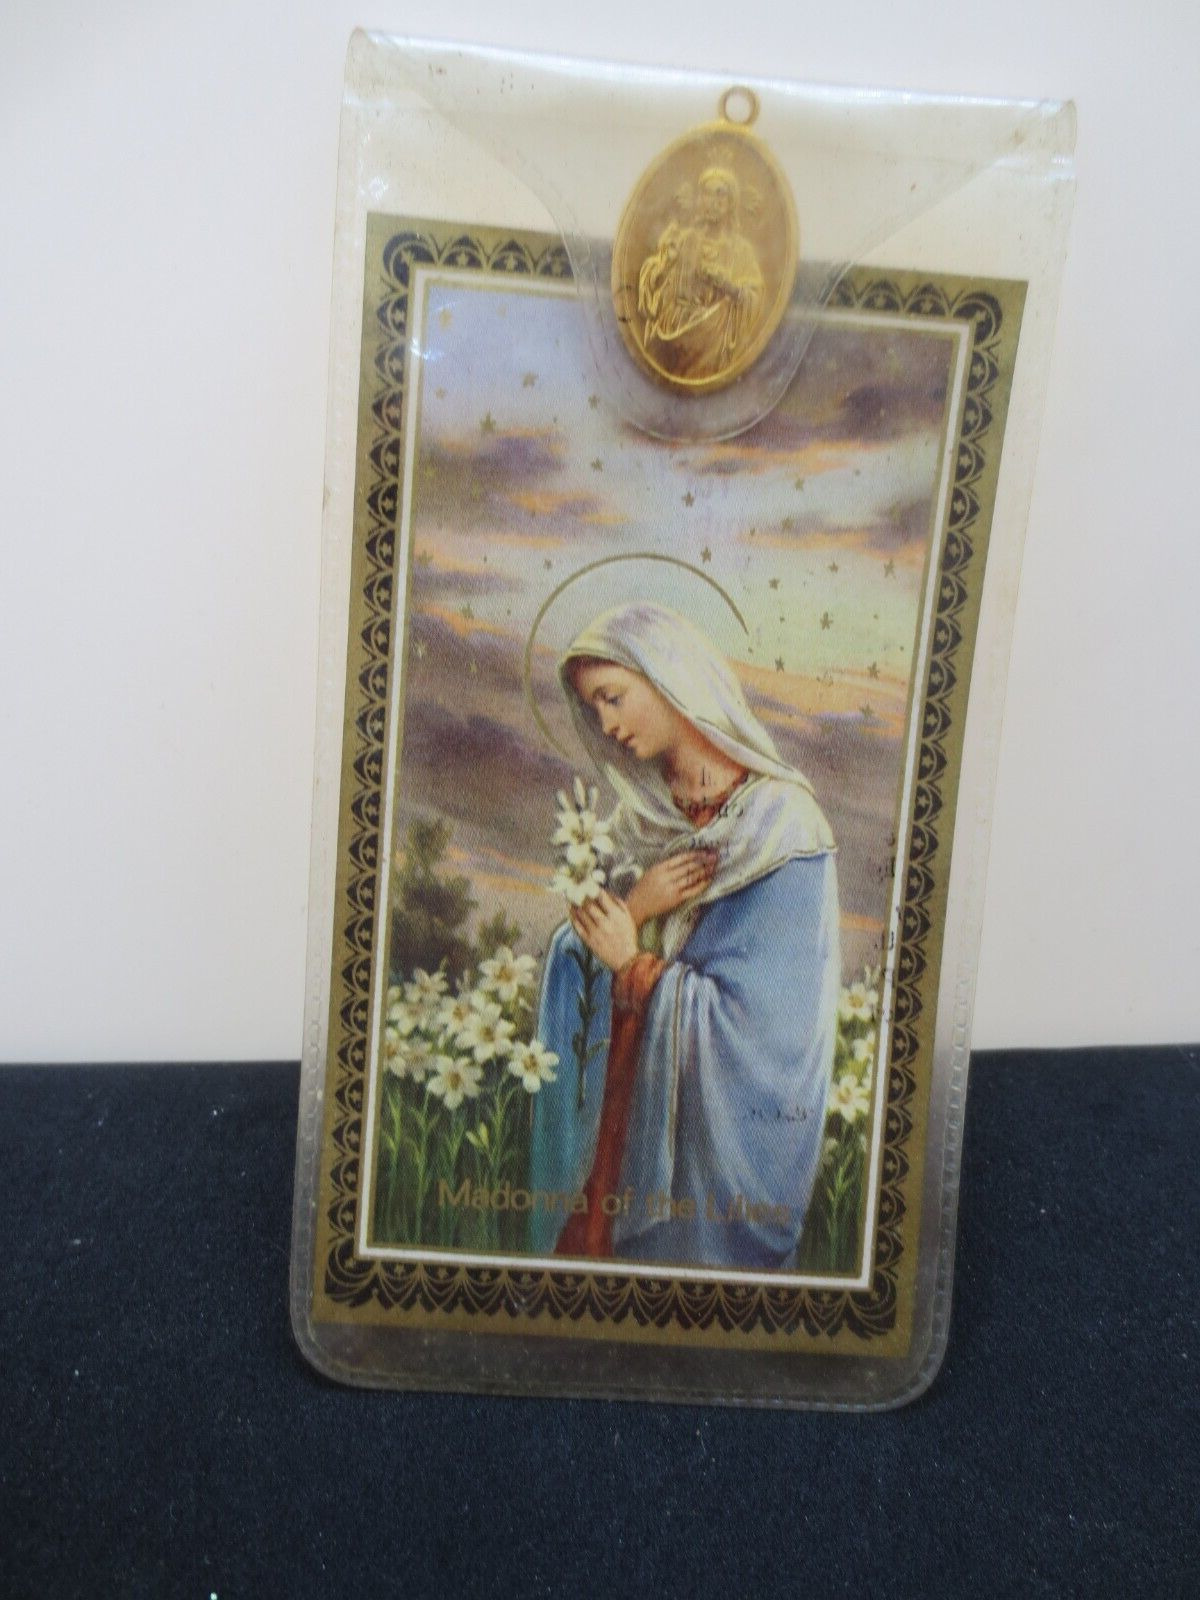 Madonna of the Lilies - A Prayer for Those who Live Alone with Charm - Brand New